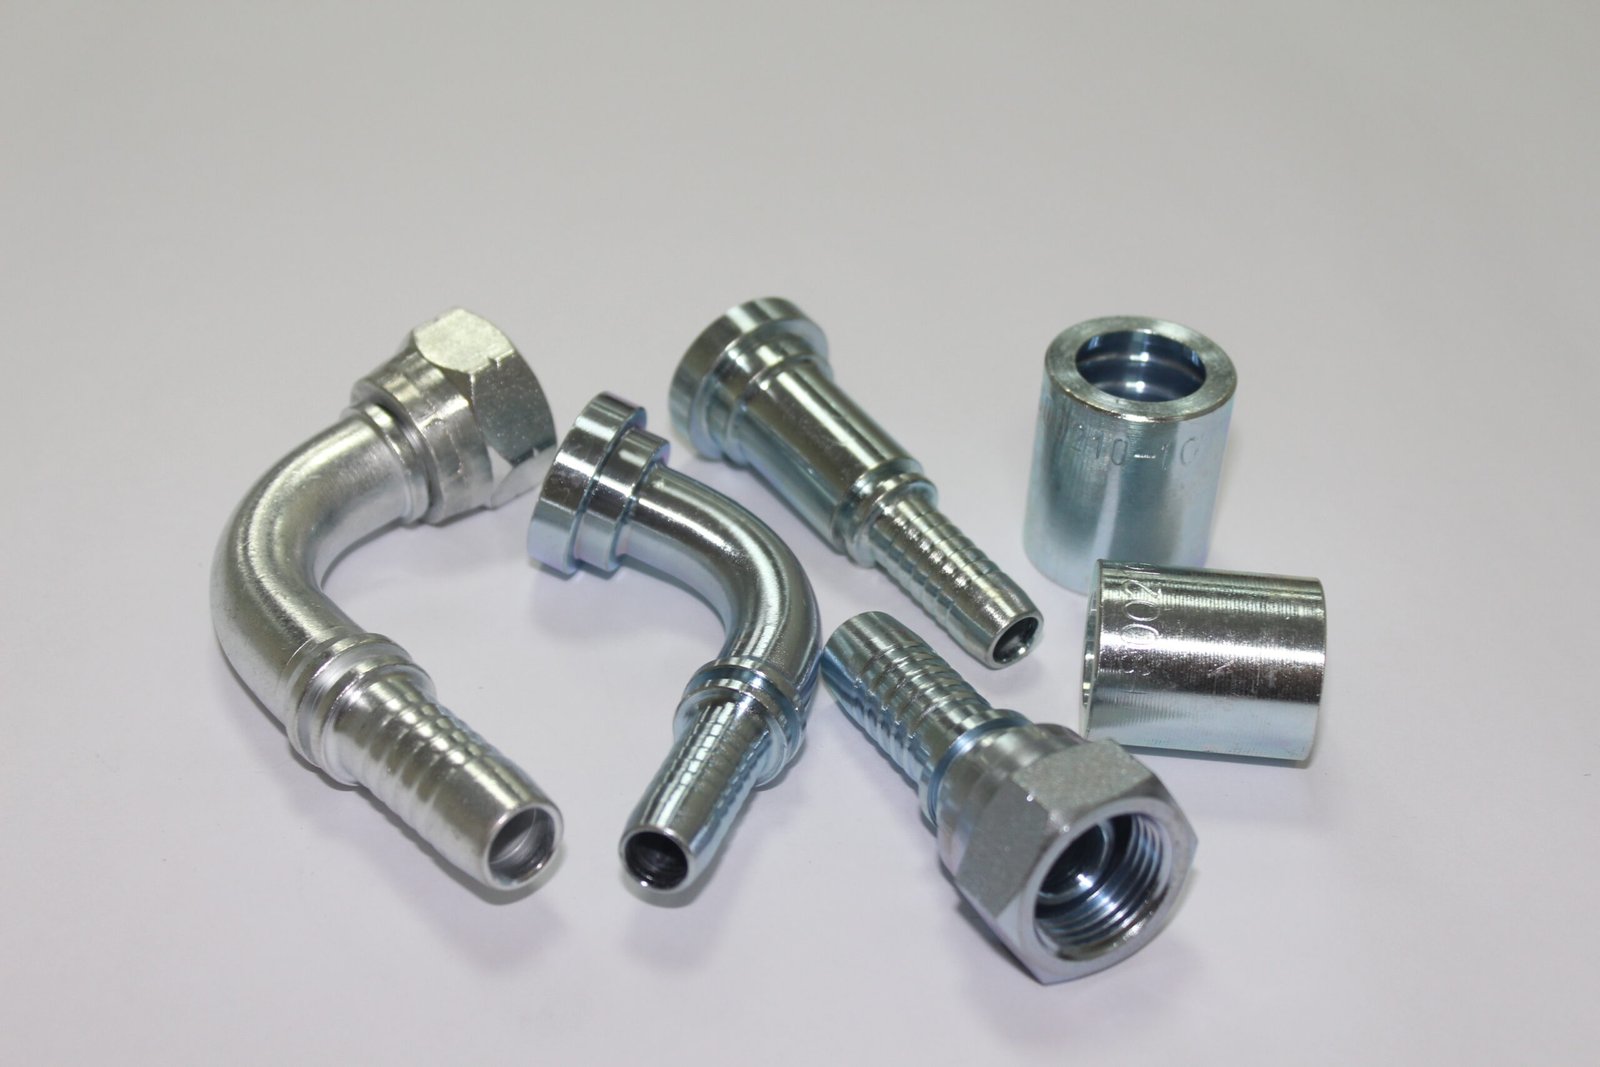 The Ultimate Checklist for Installing Hydraulic Fittings Safely